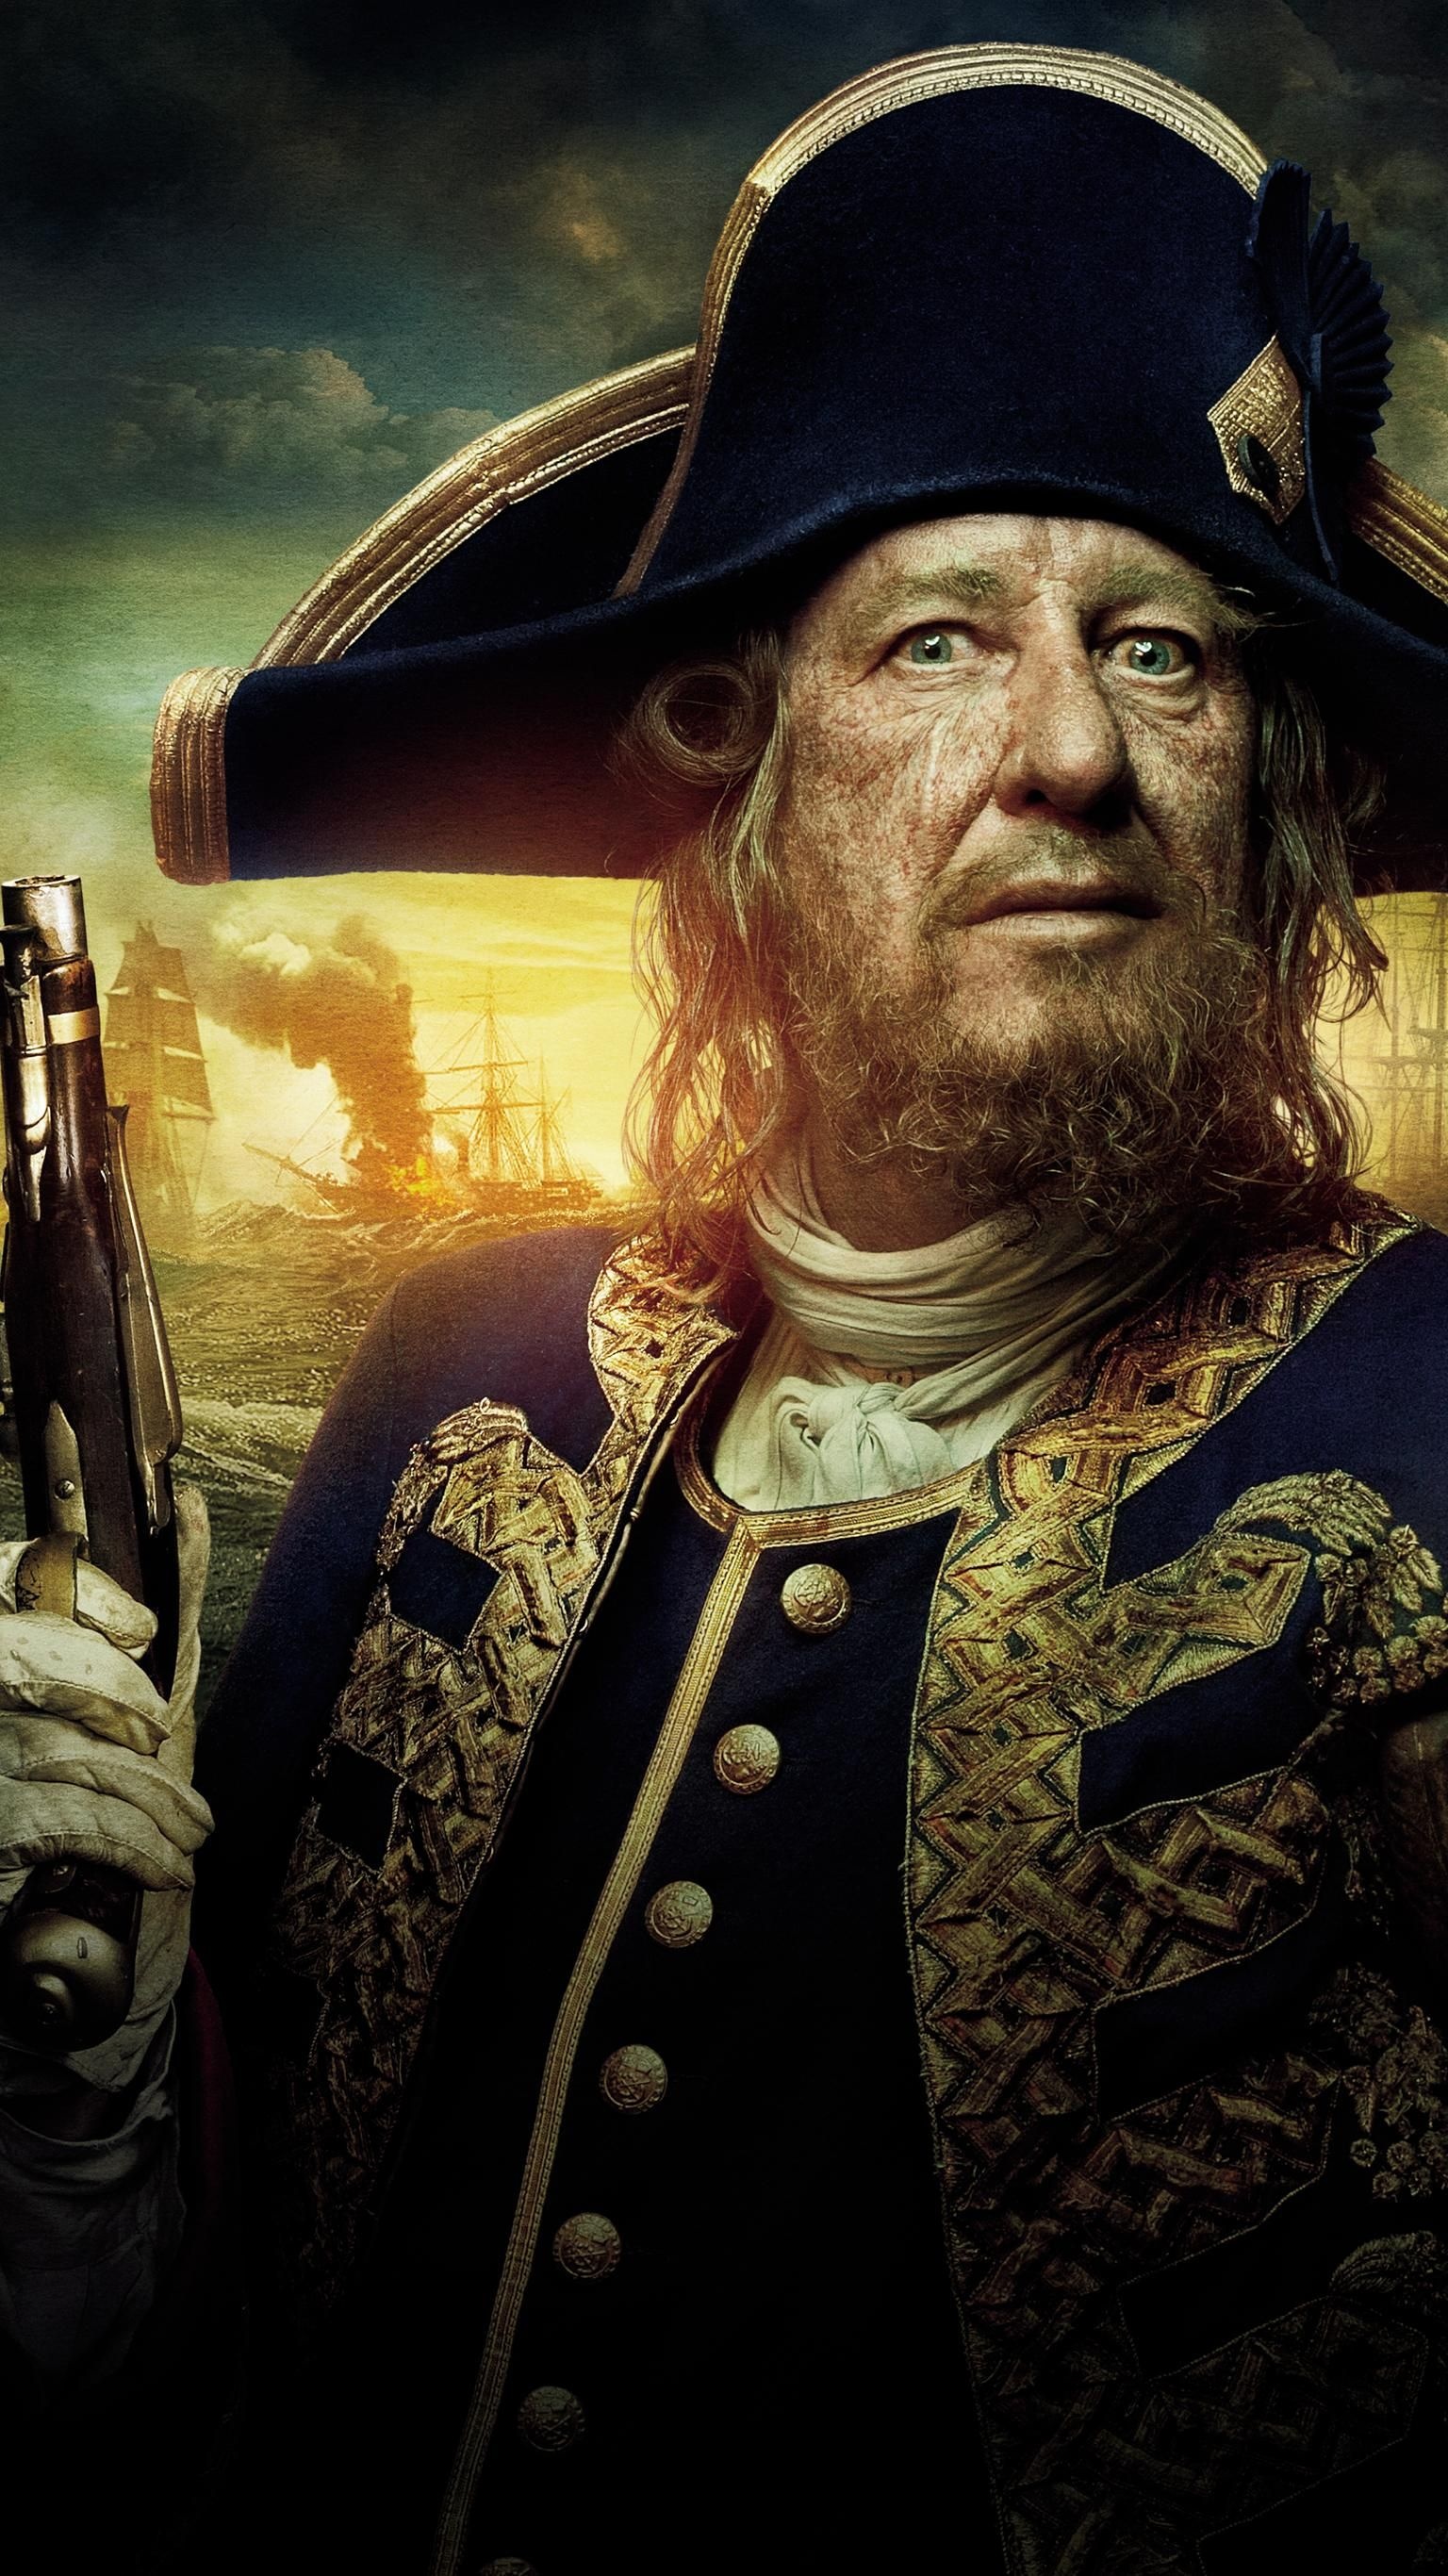 Pirates of the Caribbean: On Stranger Tides (2011), Hector Barbossa. 1540x2740 HD Wallpaper.